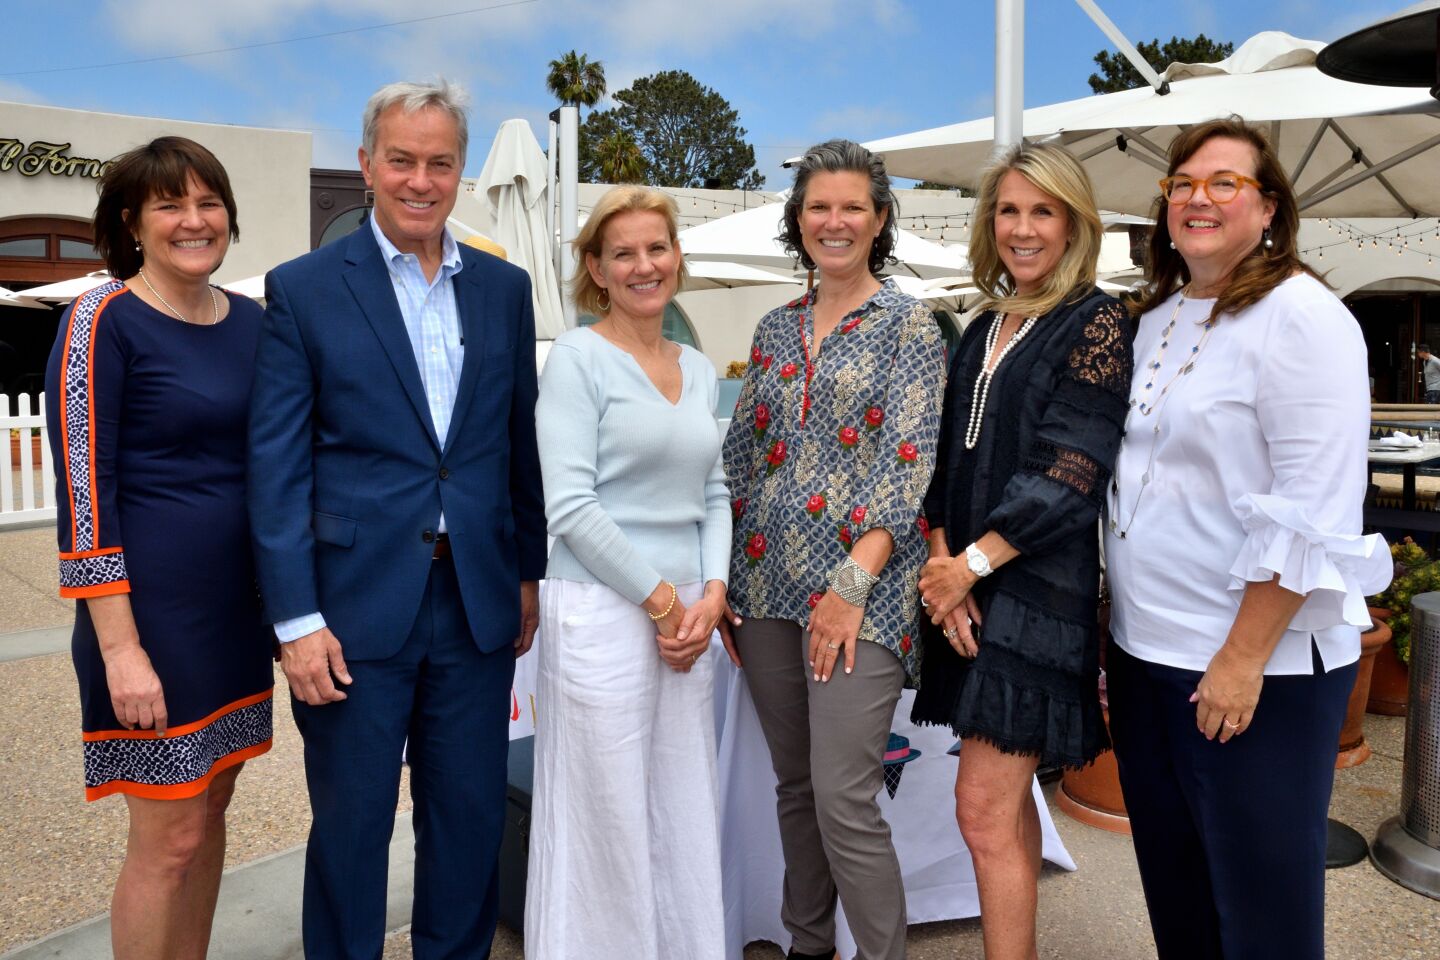 Voices for Children President and Chief Executive Kelly Douglas, NBC7 anchor Mark Mullen, Court Appointed Special Advocate Alice Brewer, author Meredith May and event co-chairwomen Patty Brutten and Marina Marrelli attend Voices for Children's "Uplifting Voices" fundraiser May 7.